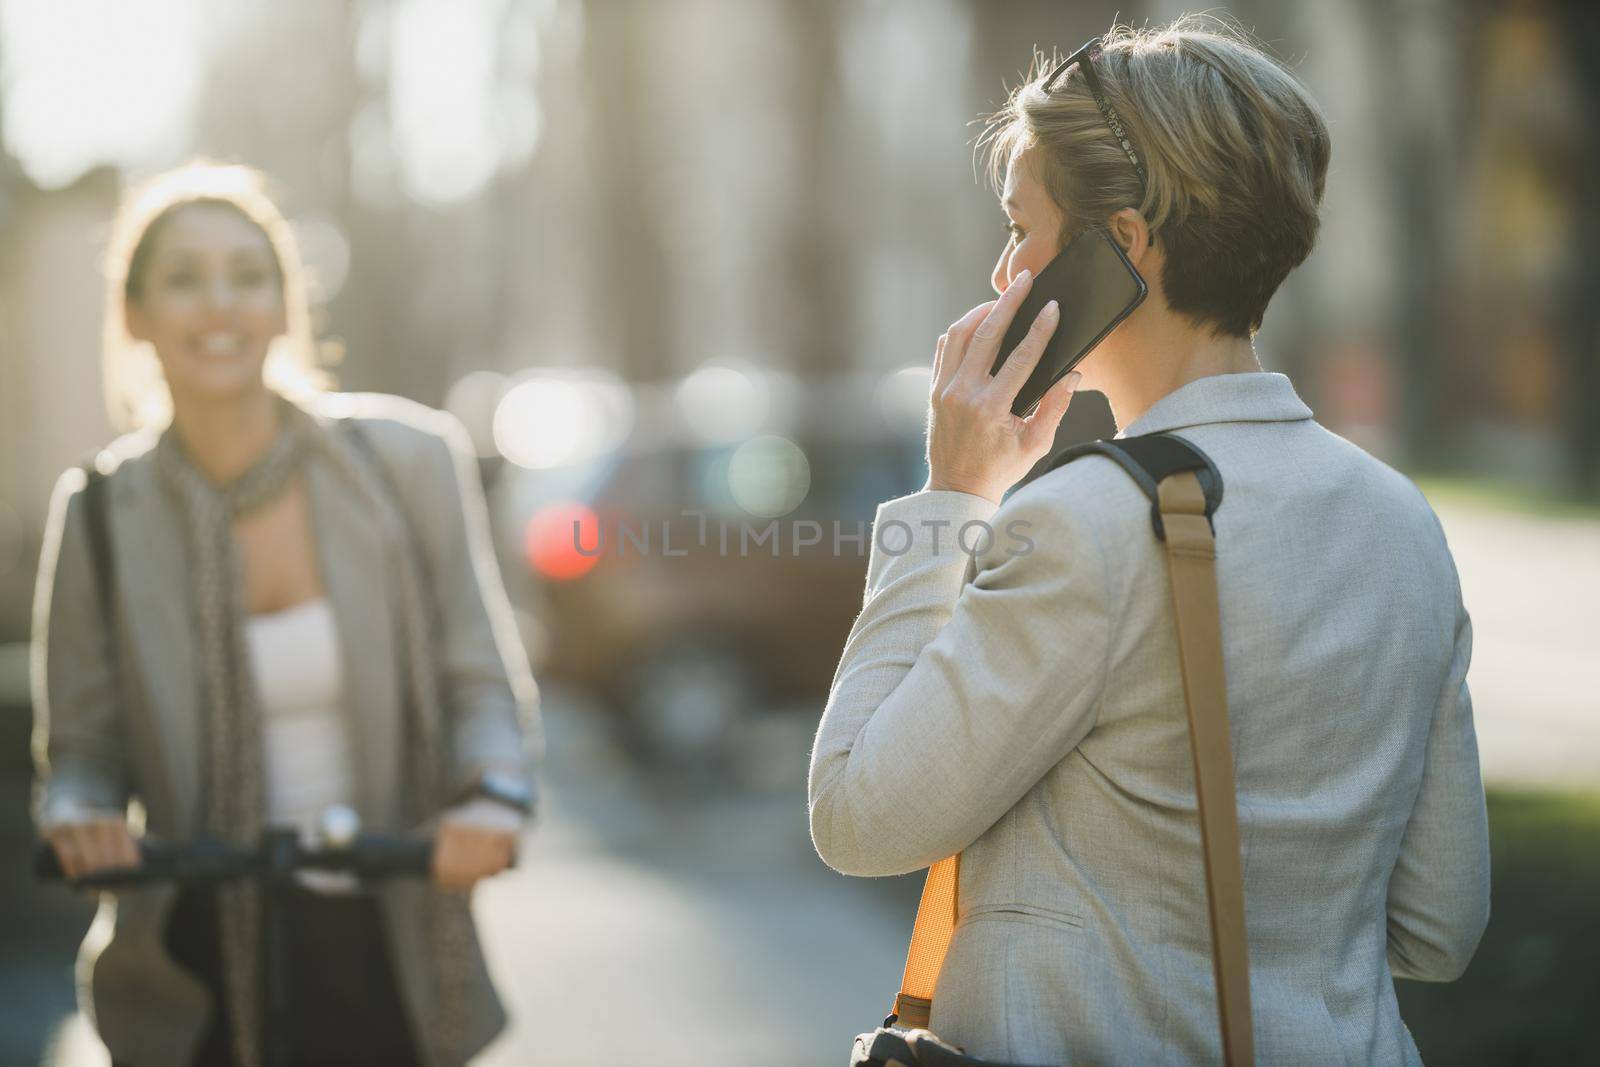 Rear view of a mature business woman using a smartphone while going to work.